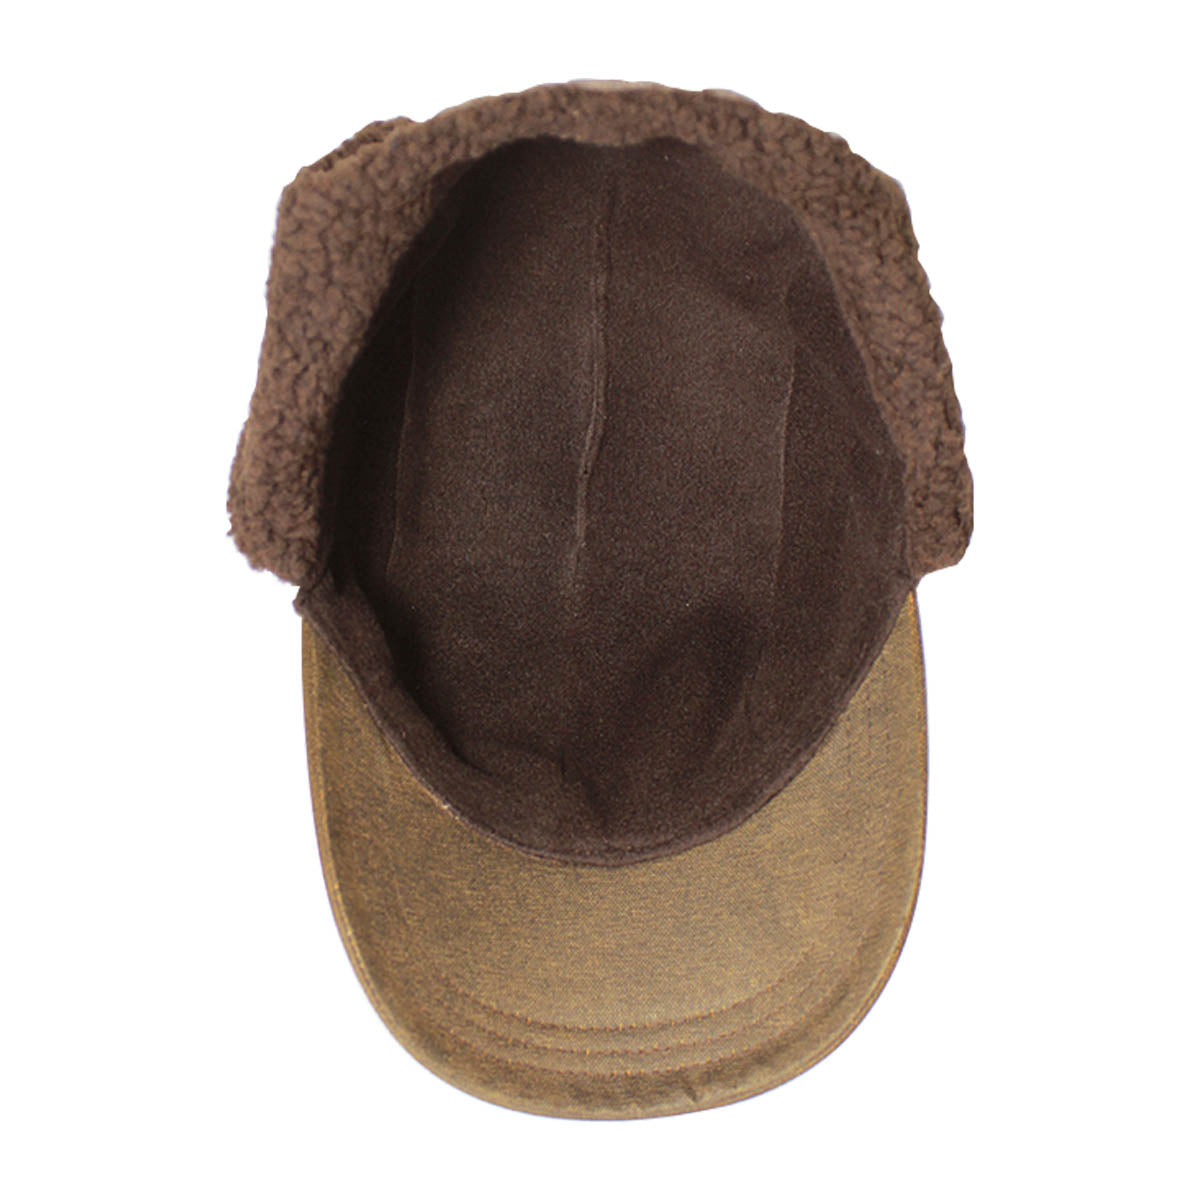 Unisex Weathered Cotton Cap warm light weight polar fleeces lining and ear cover 1161